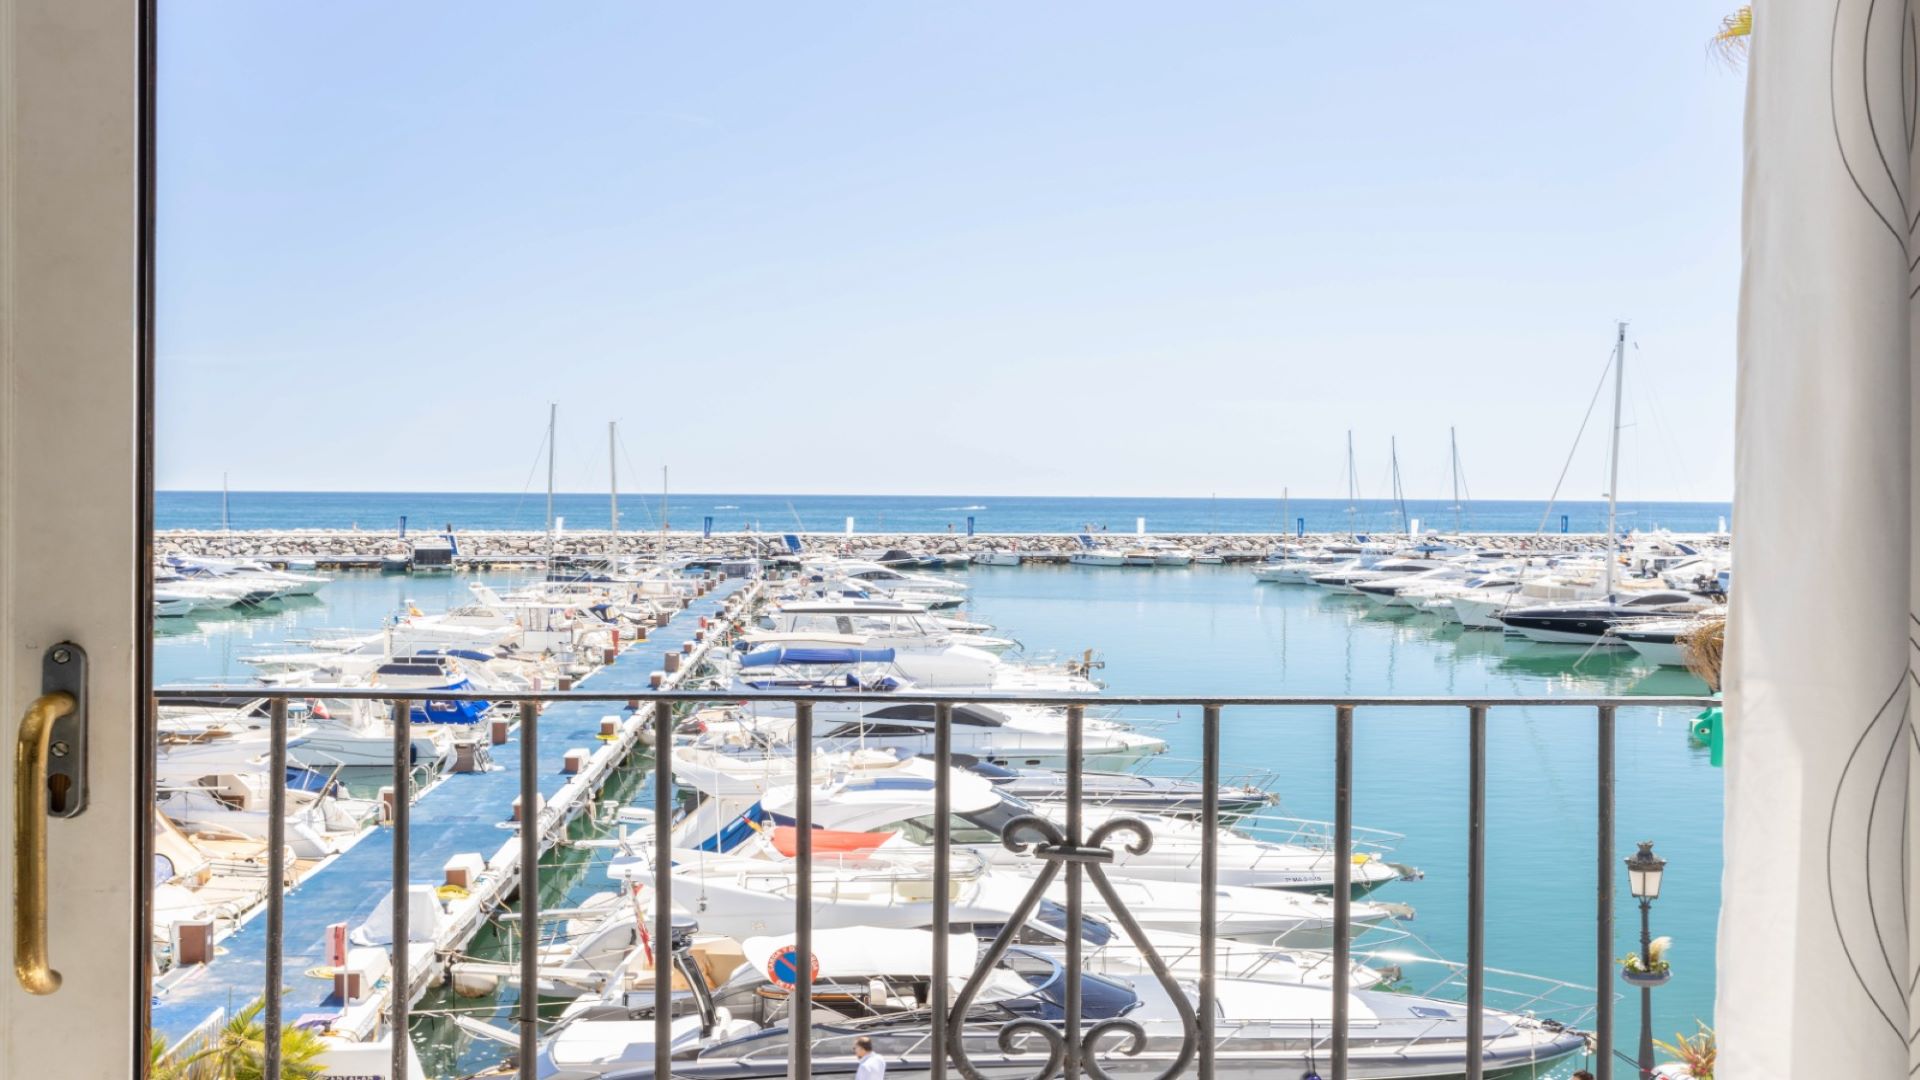 Puerto Banus Sign in Famouse Travel Destination and Luxury Harbour